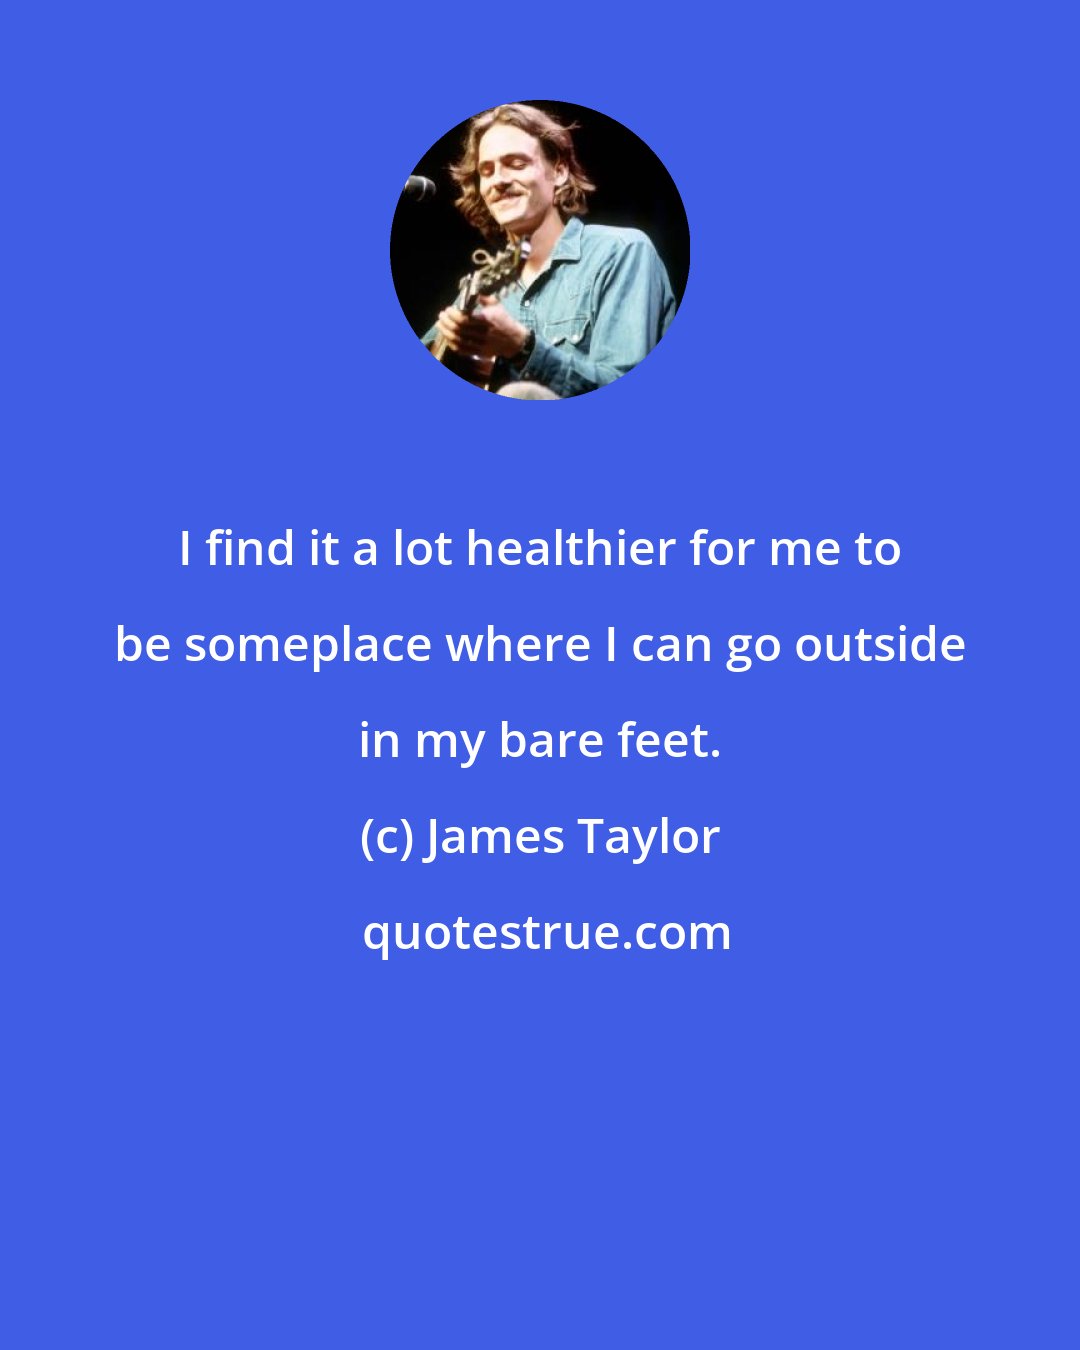 James Taylor: I find it a lot healthier for me to be someplace where I can go outside in my bare feet.